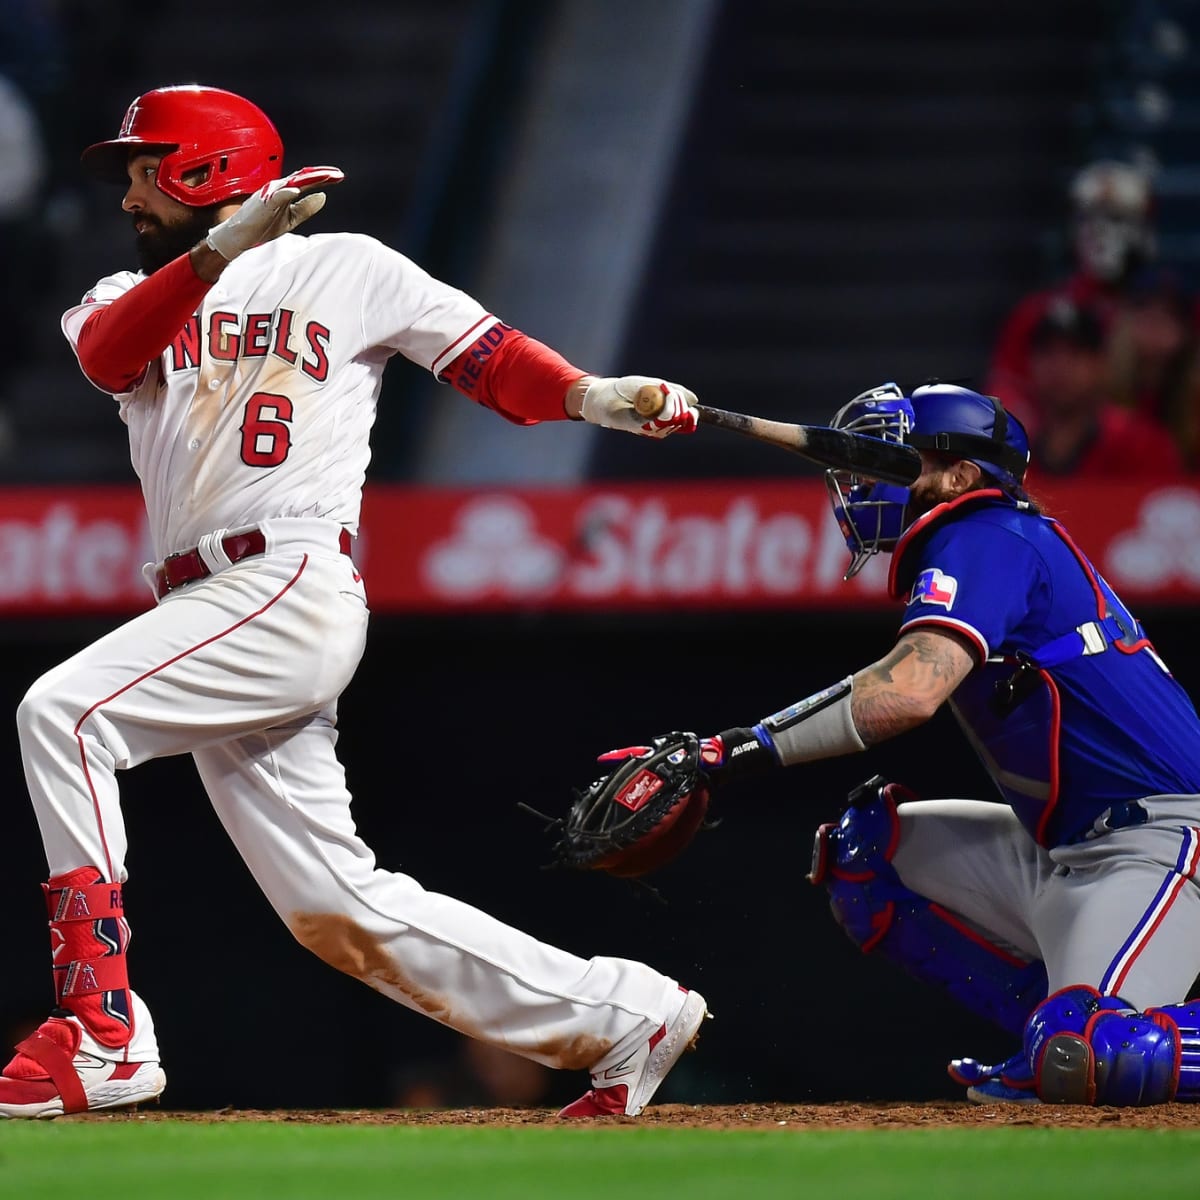 Angels expect Anthony Rendon's return to boost performance with